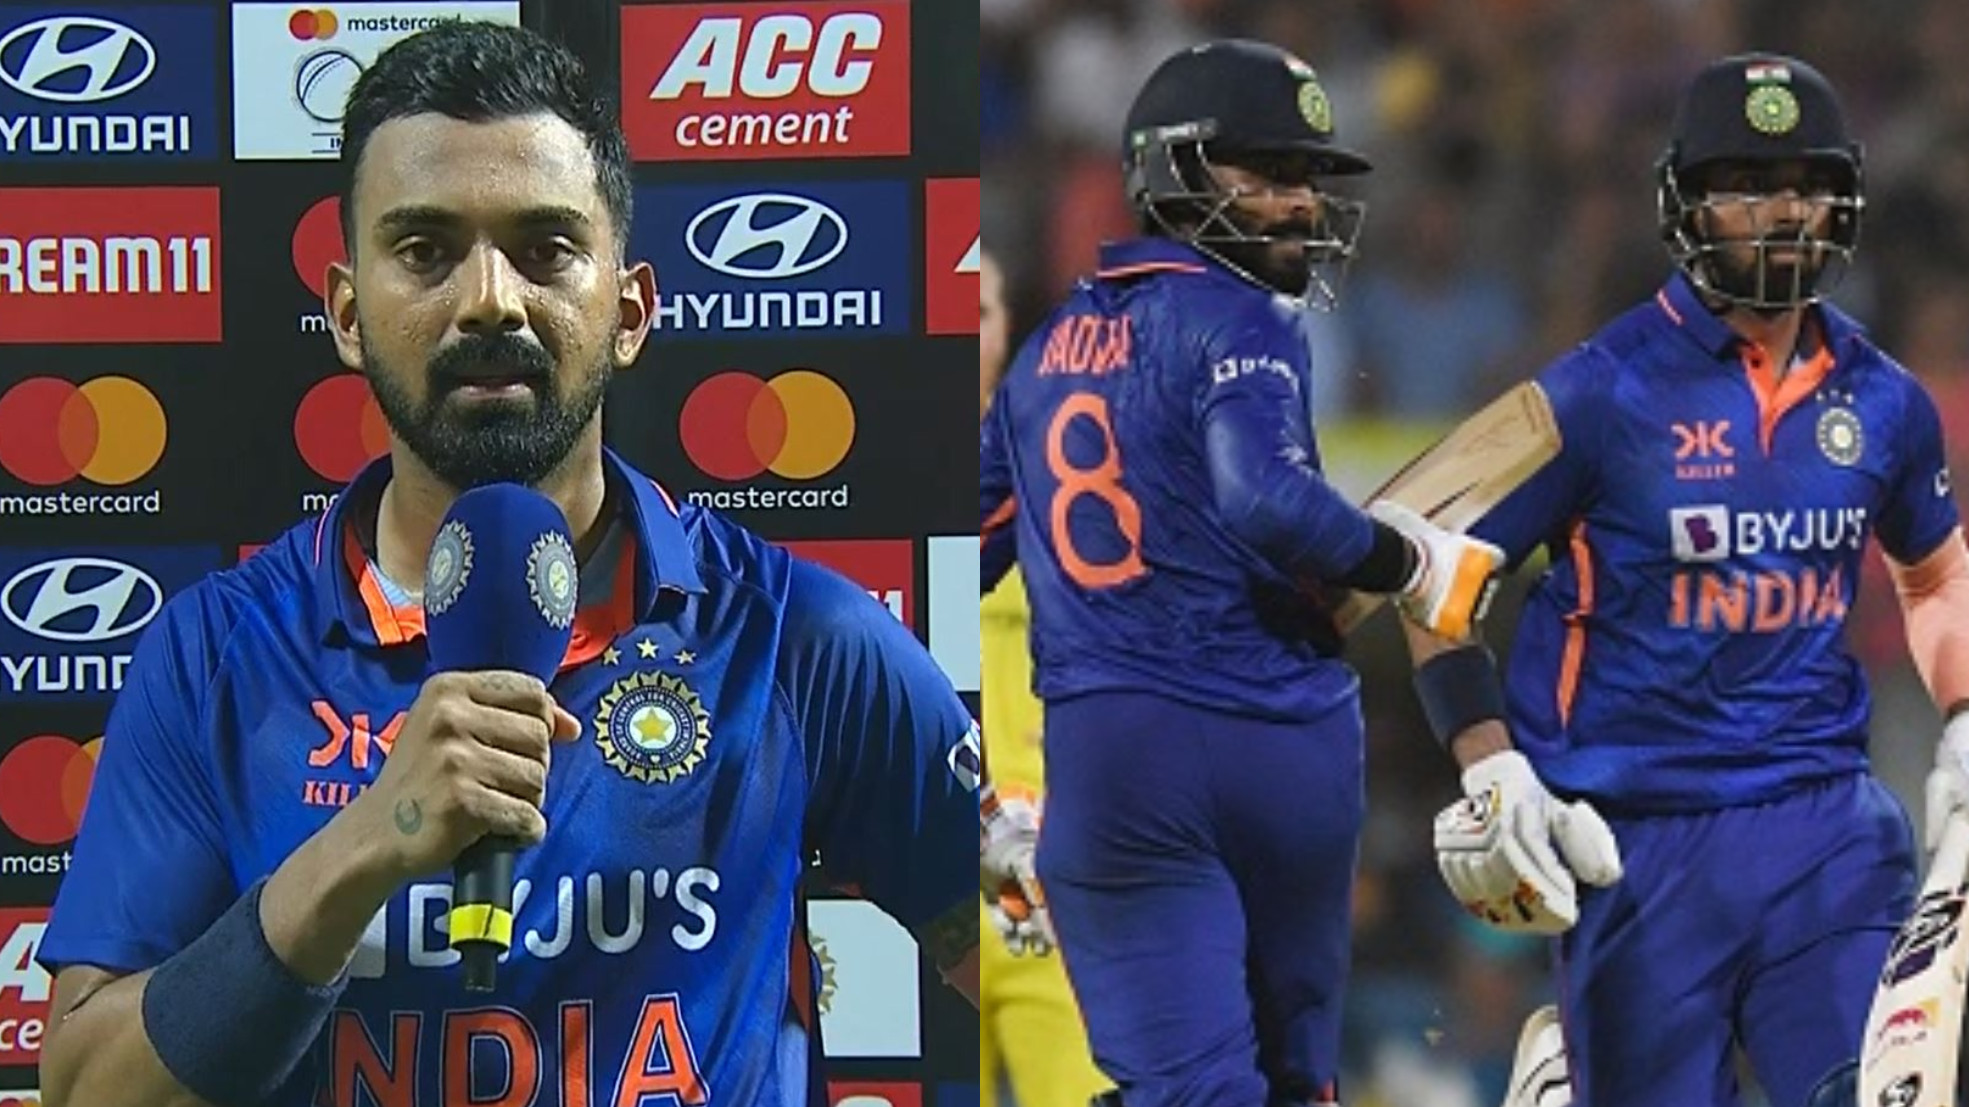 IND v AUS 2023: “We wanted to be positive and put the loose balls away”- KL Rahul on his and Jadeja’s plans during tense chase